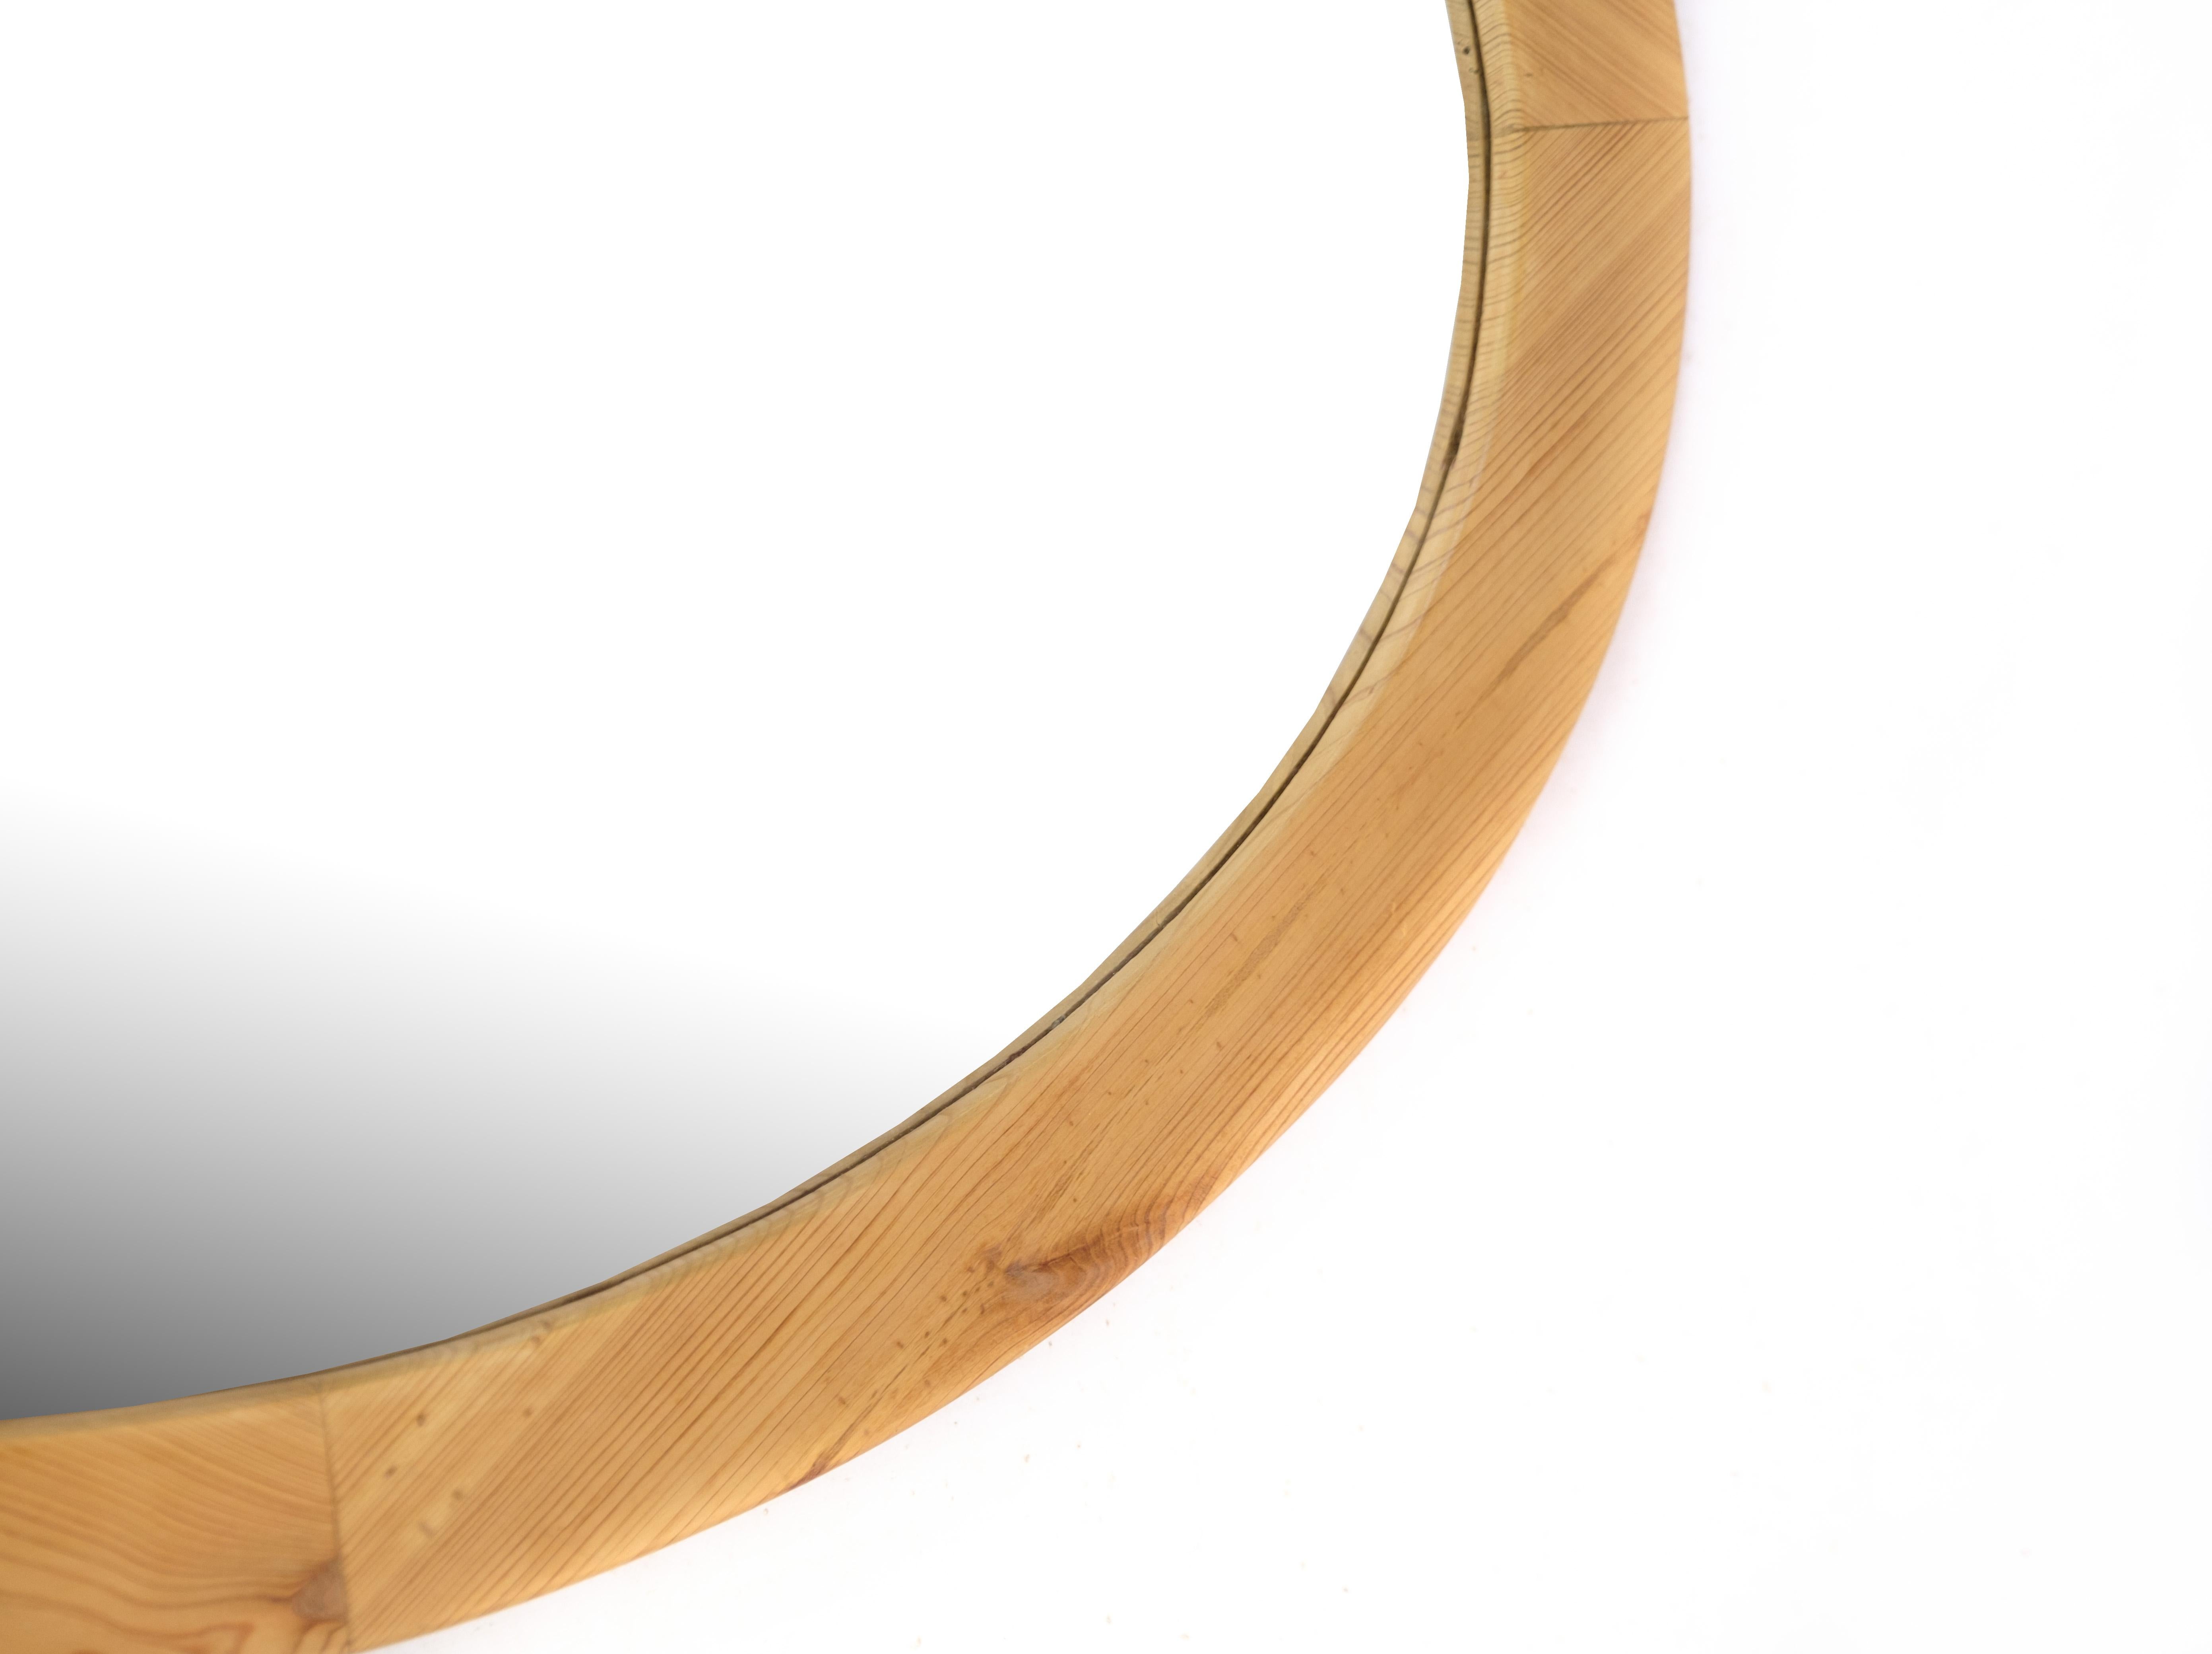 Oval mirror in light pine wood from around the 1920s.
Dimensions in cm: H:88 W:62.